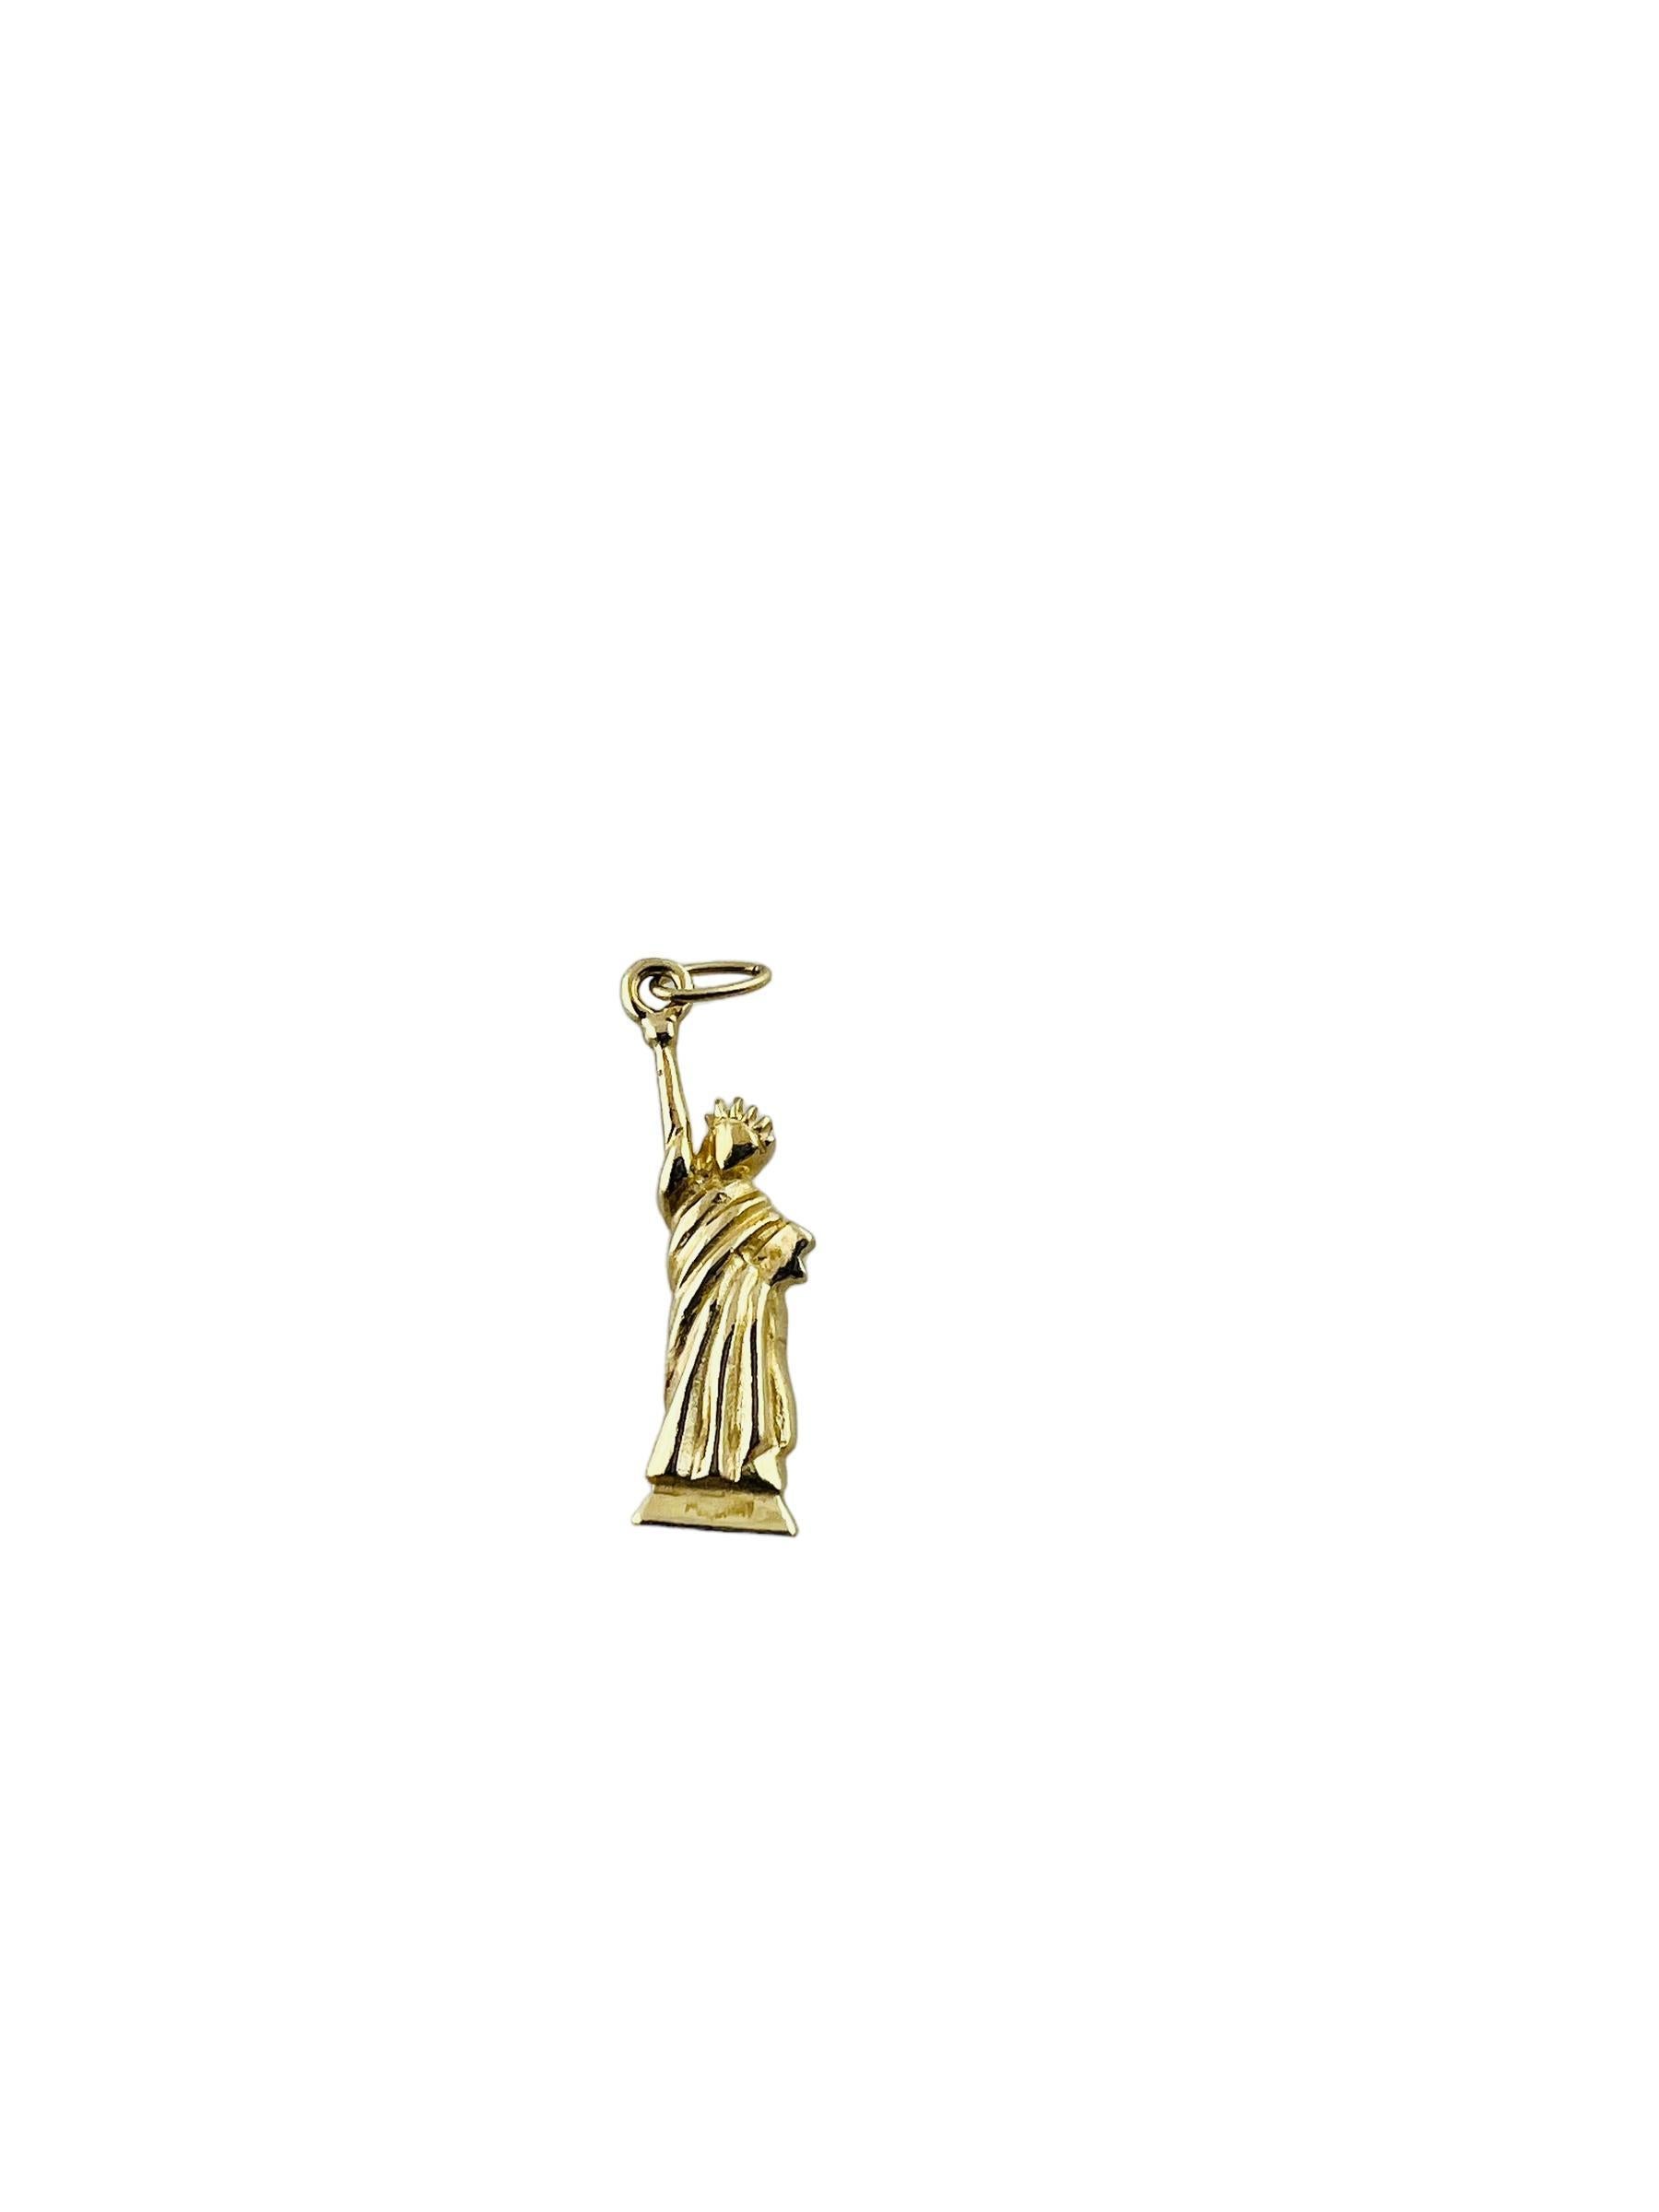 14K Yellow Gold Statue of Liberty Charm Pendant #15553 For Sale 2